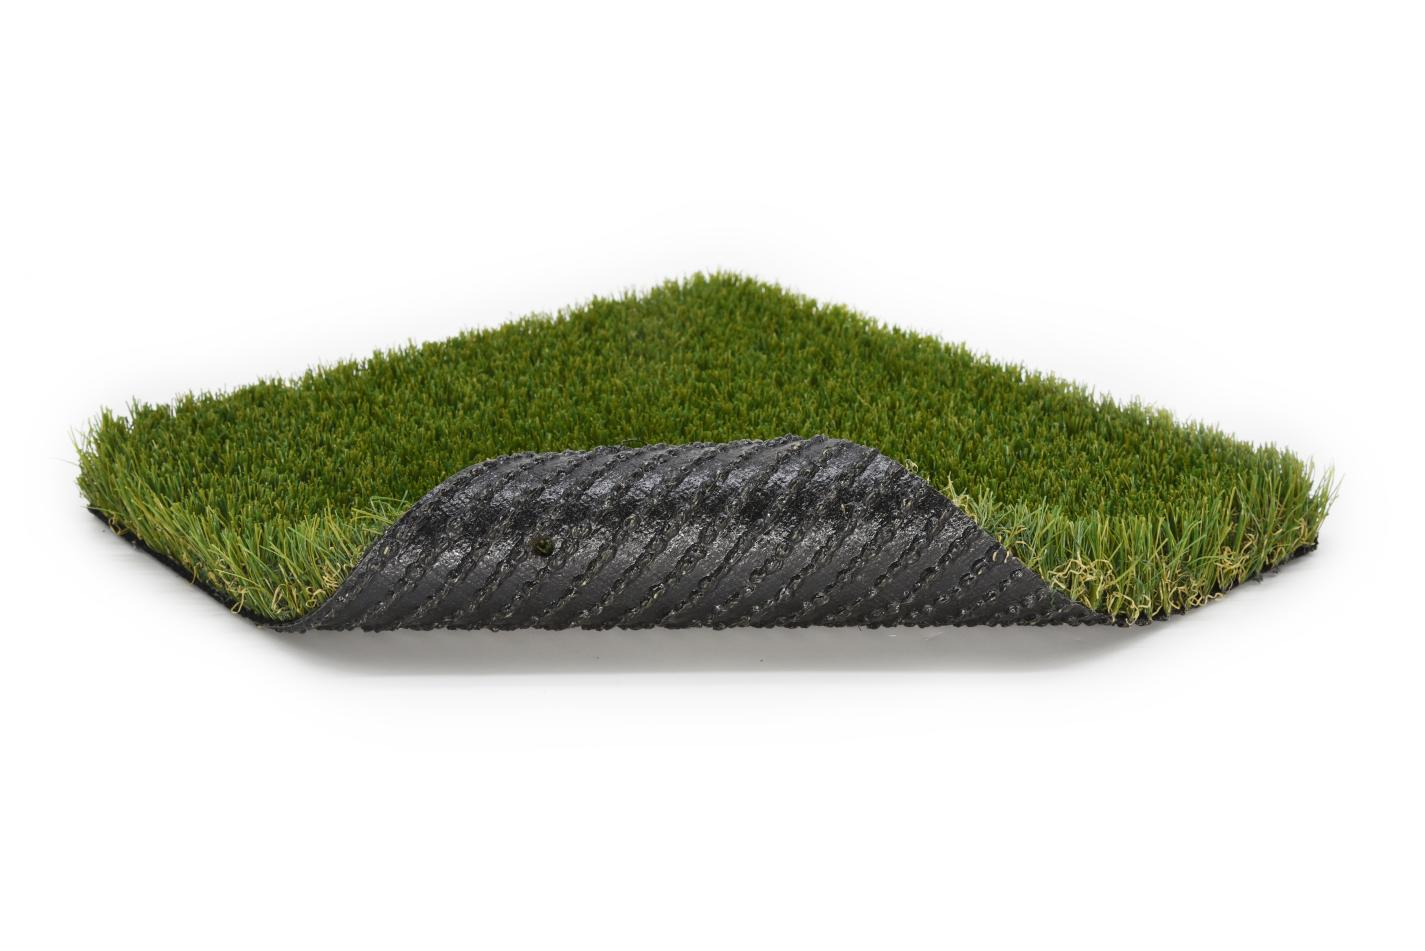 Factors contributing to the cost of artificial grass